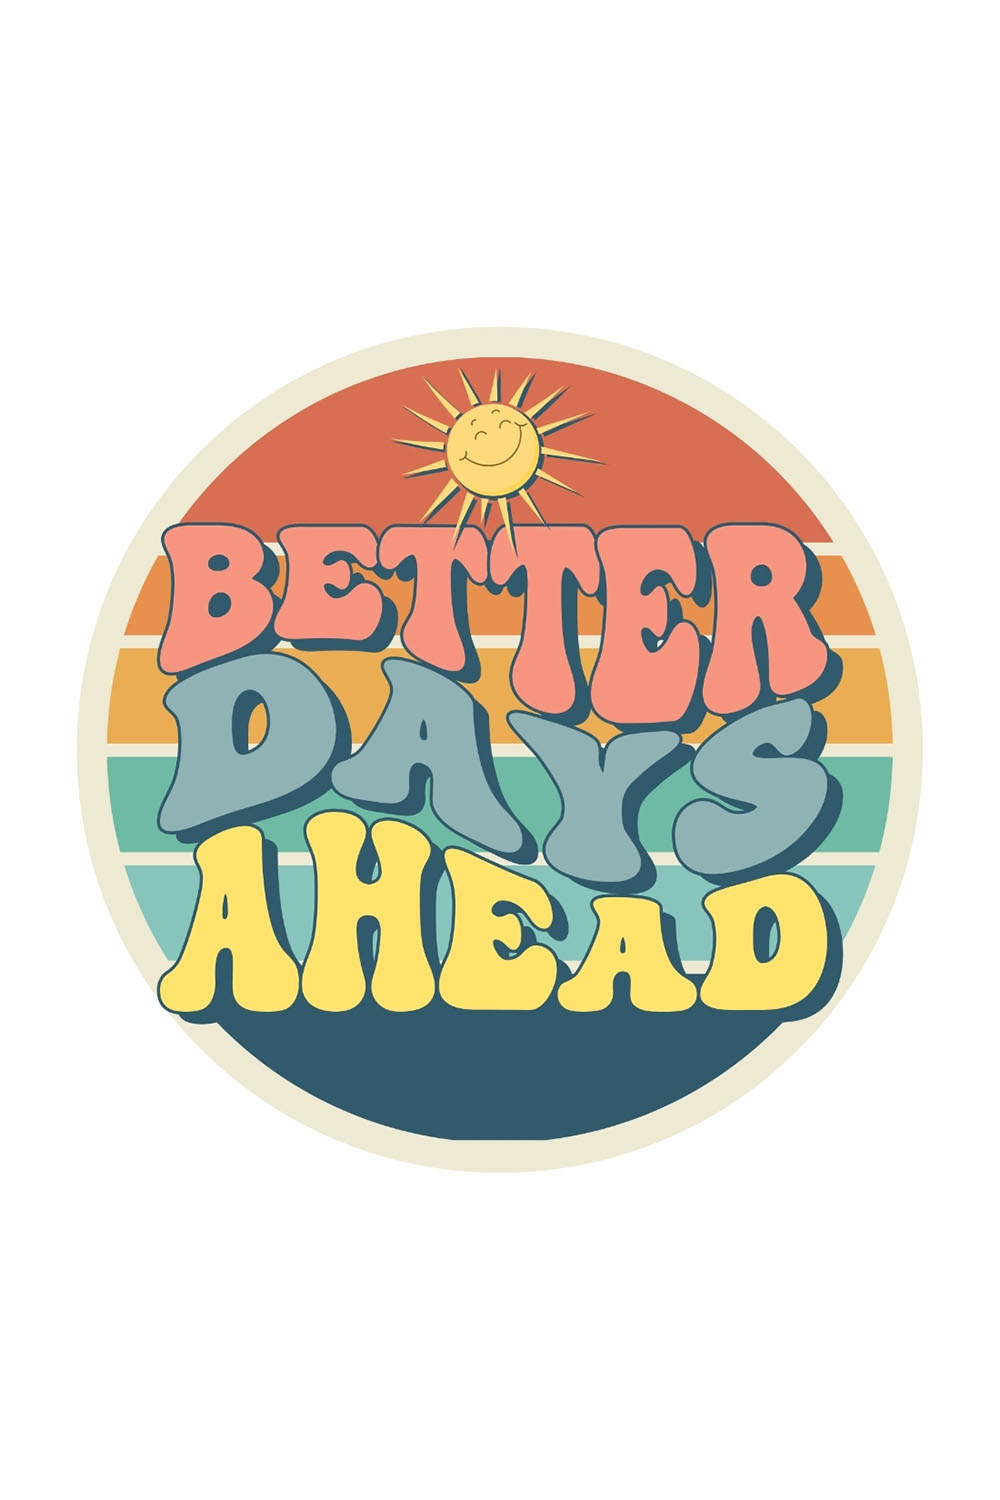 Better Days Ahead Design SVG, PNG pinterest preview image.